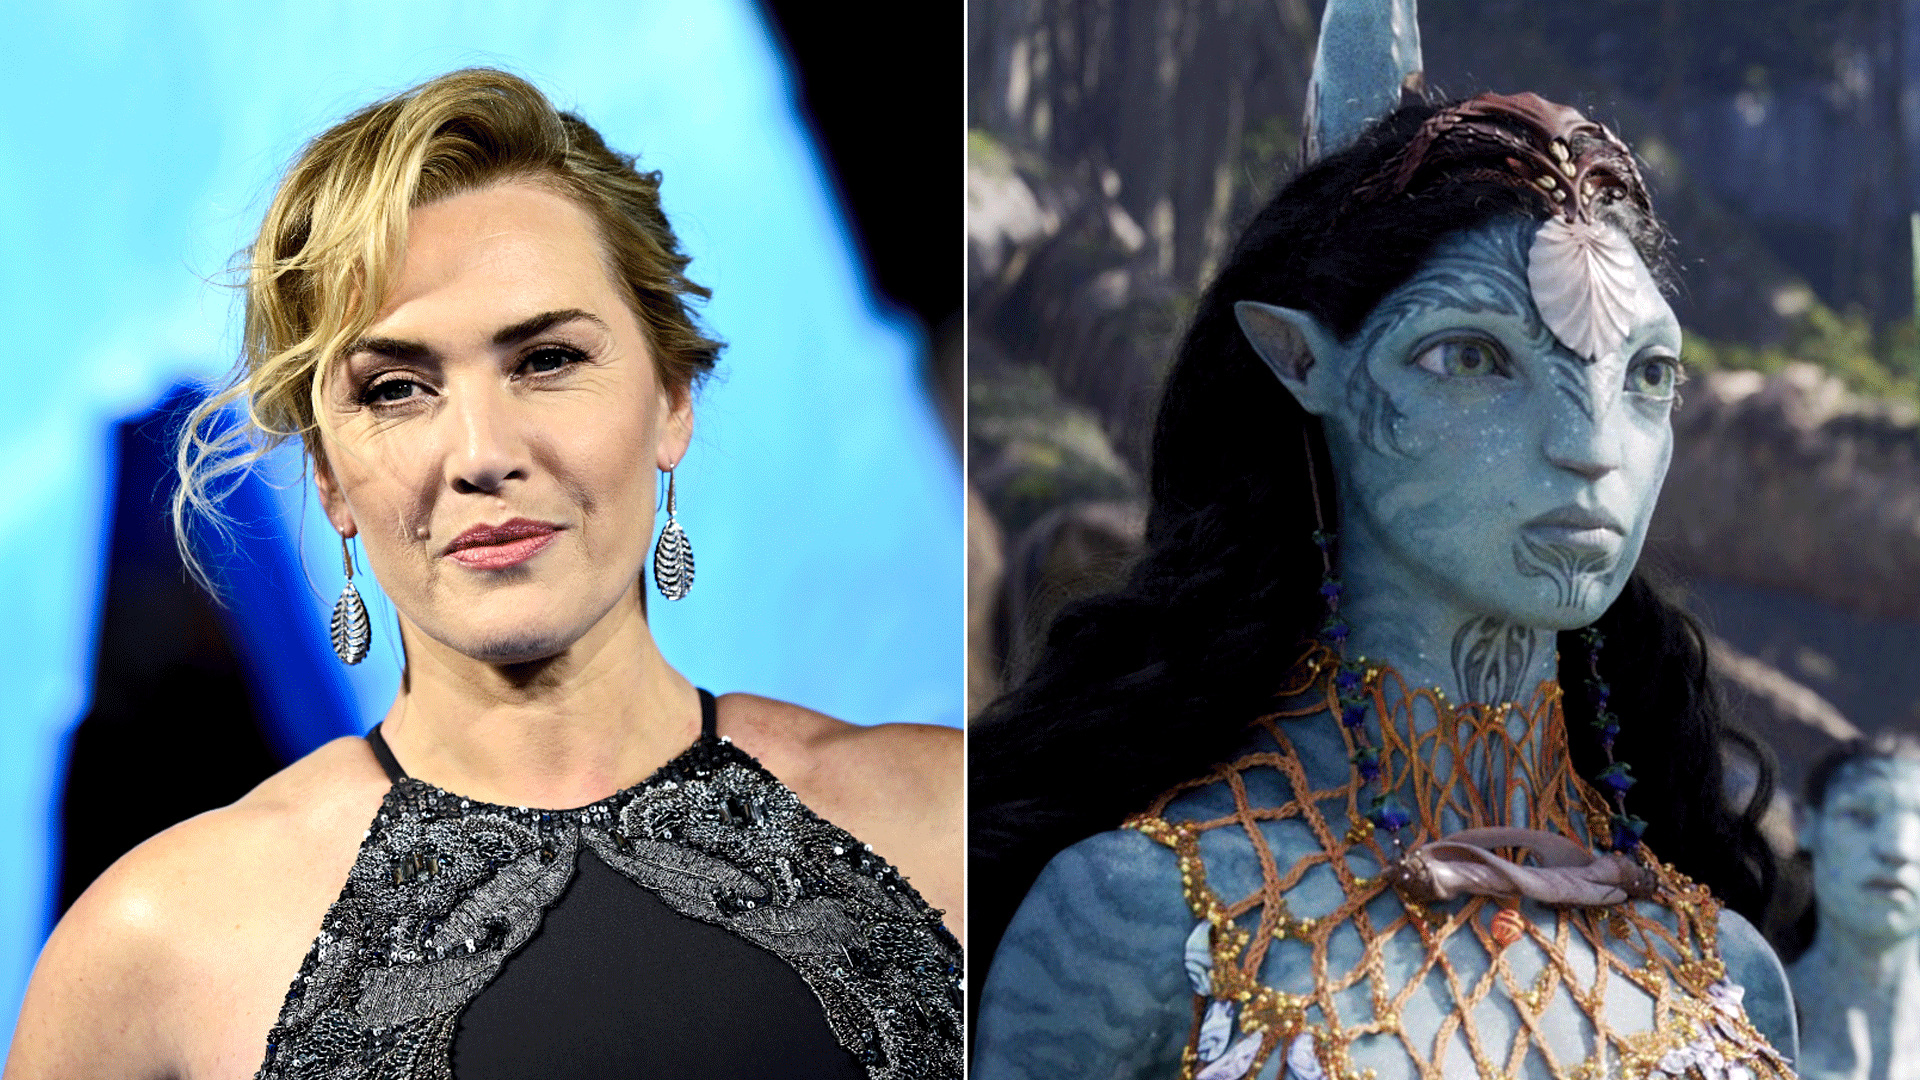 Kate Winslet Avatar 2 The Way of Water